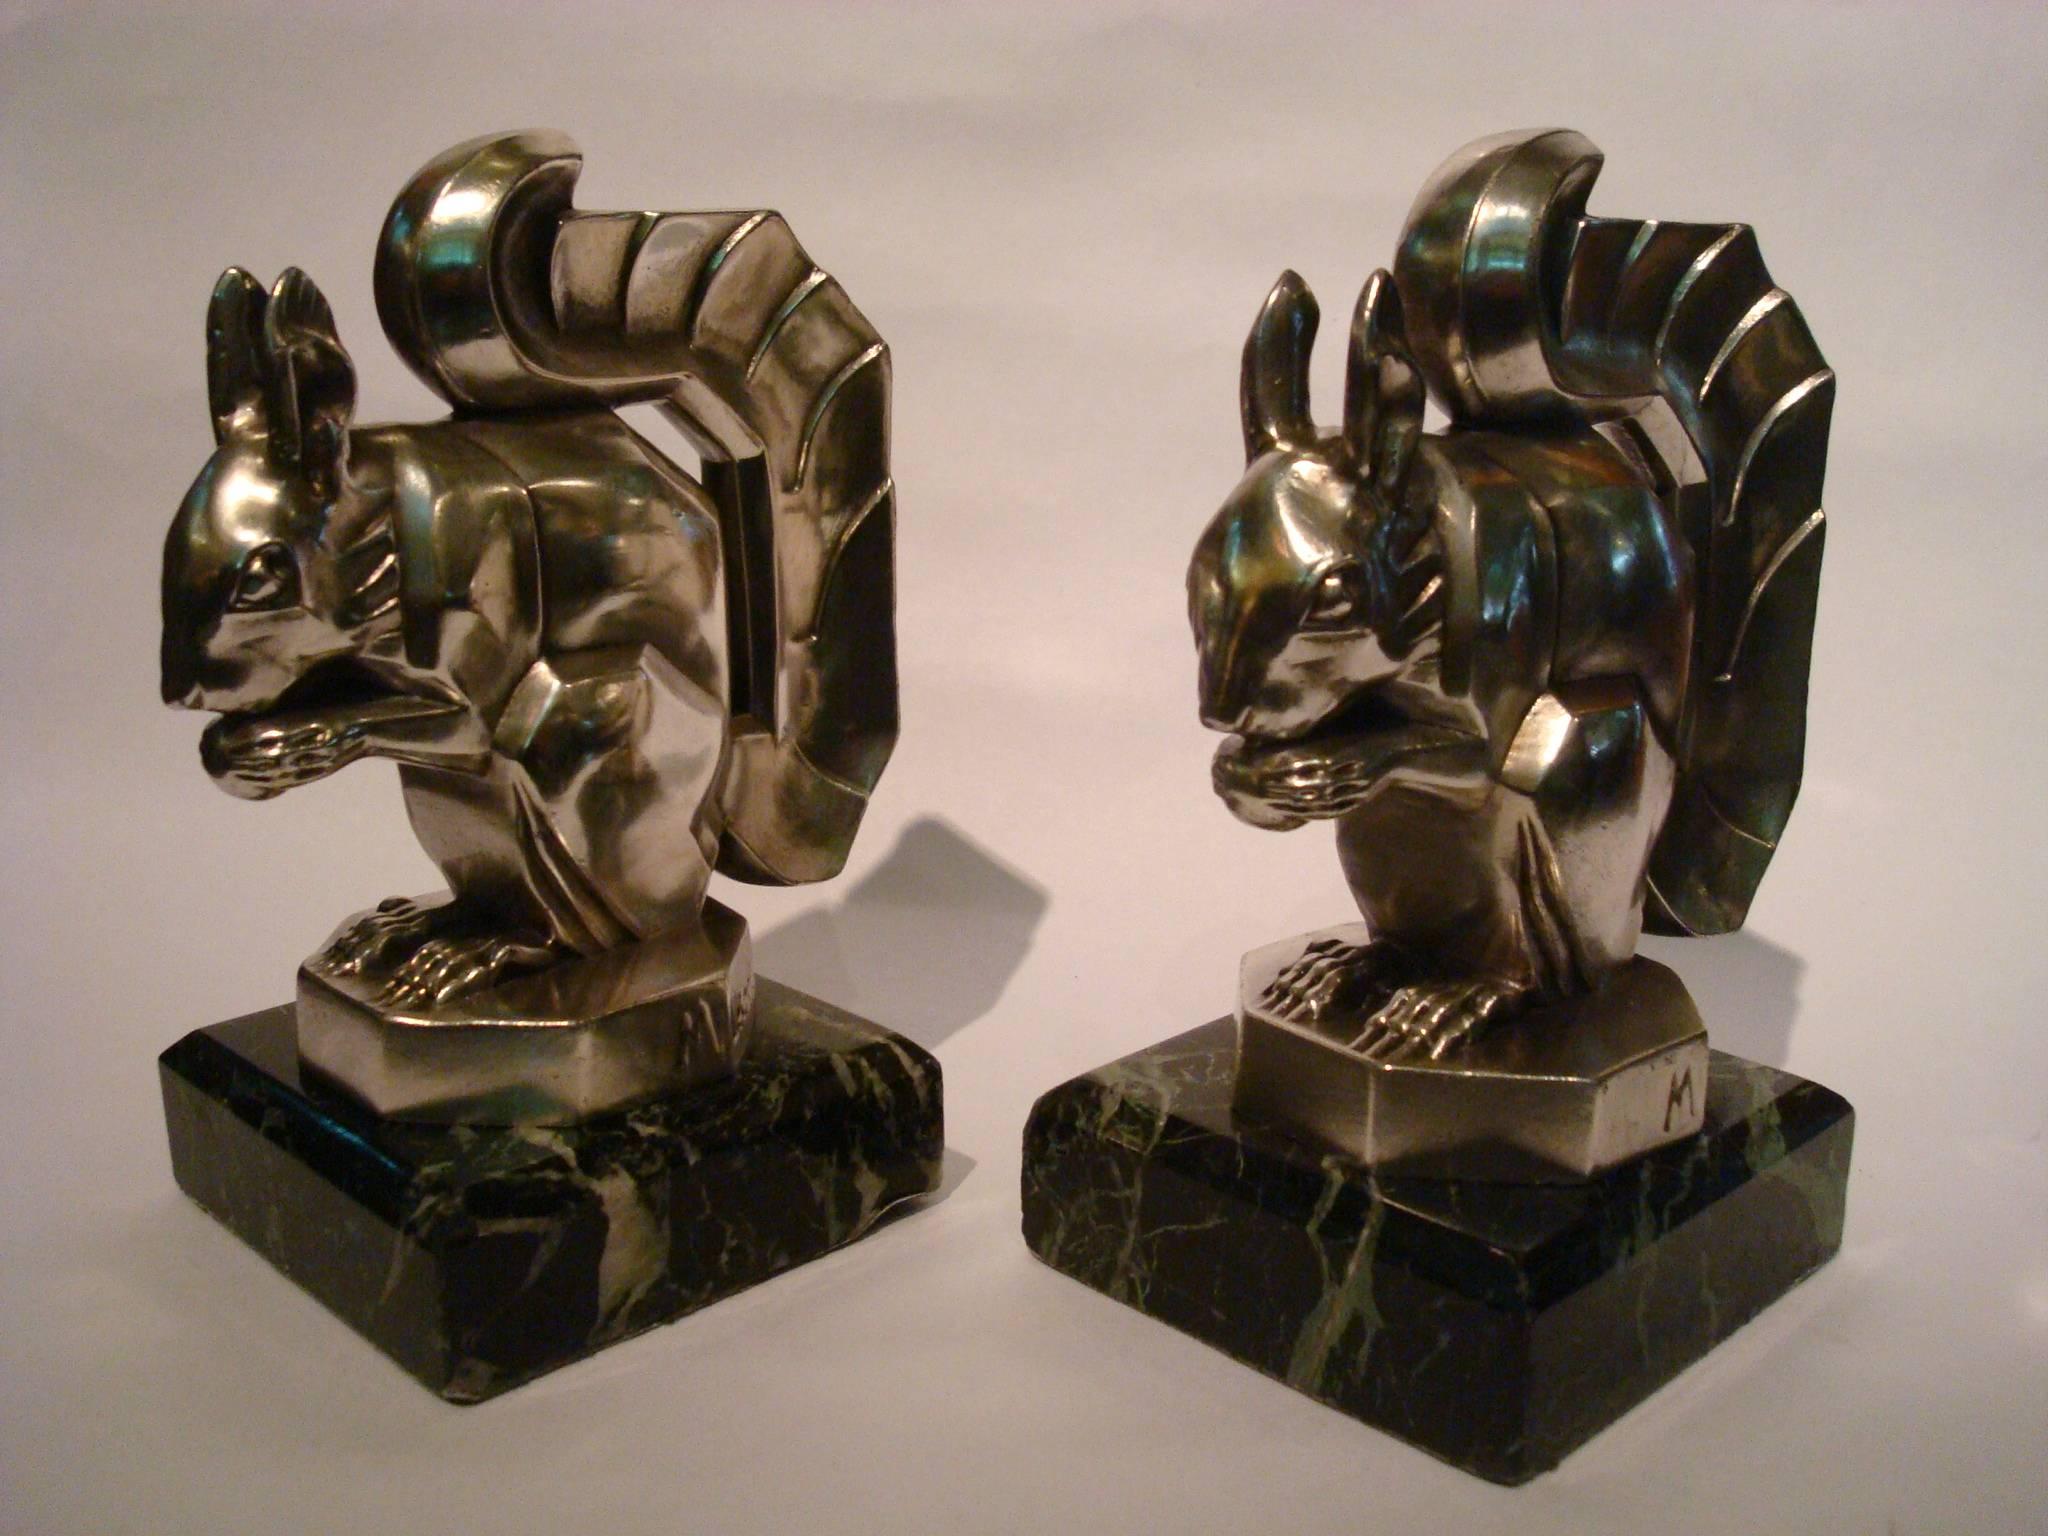 French Art Deco Squirrel Bookends by Max Le Verrier, France, 1930